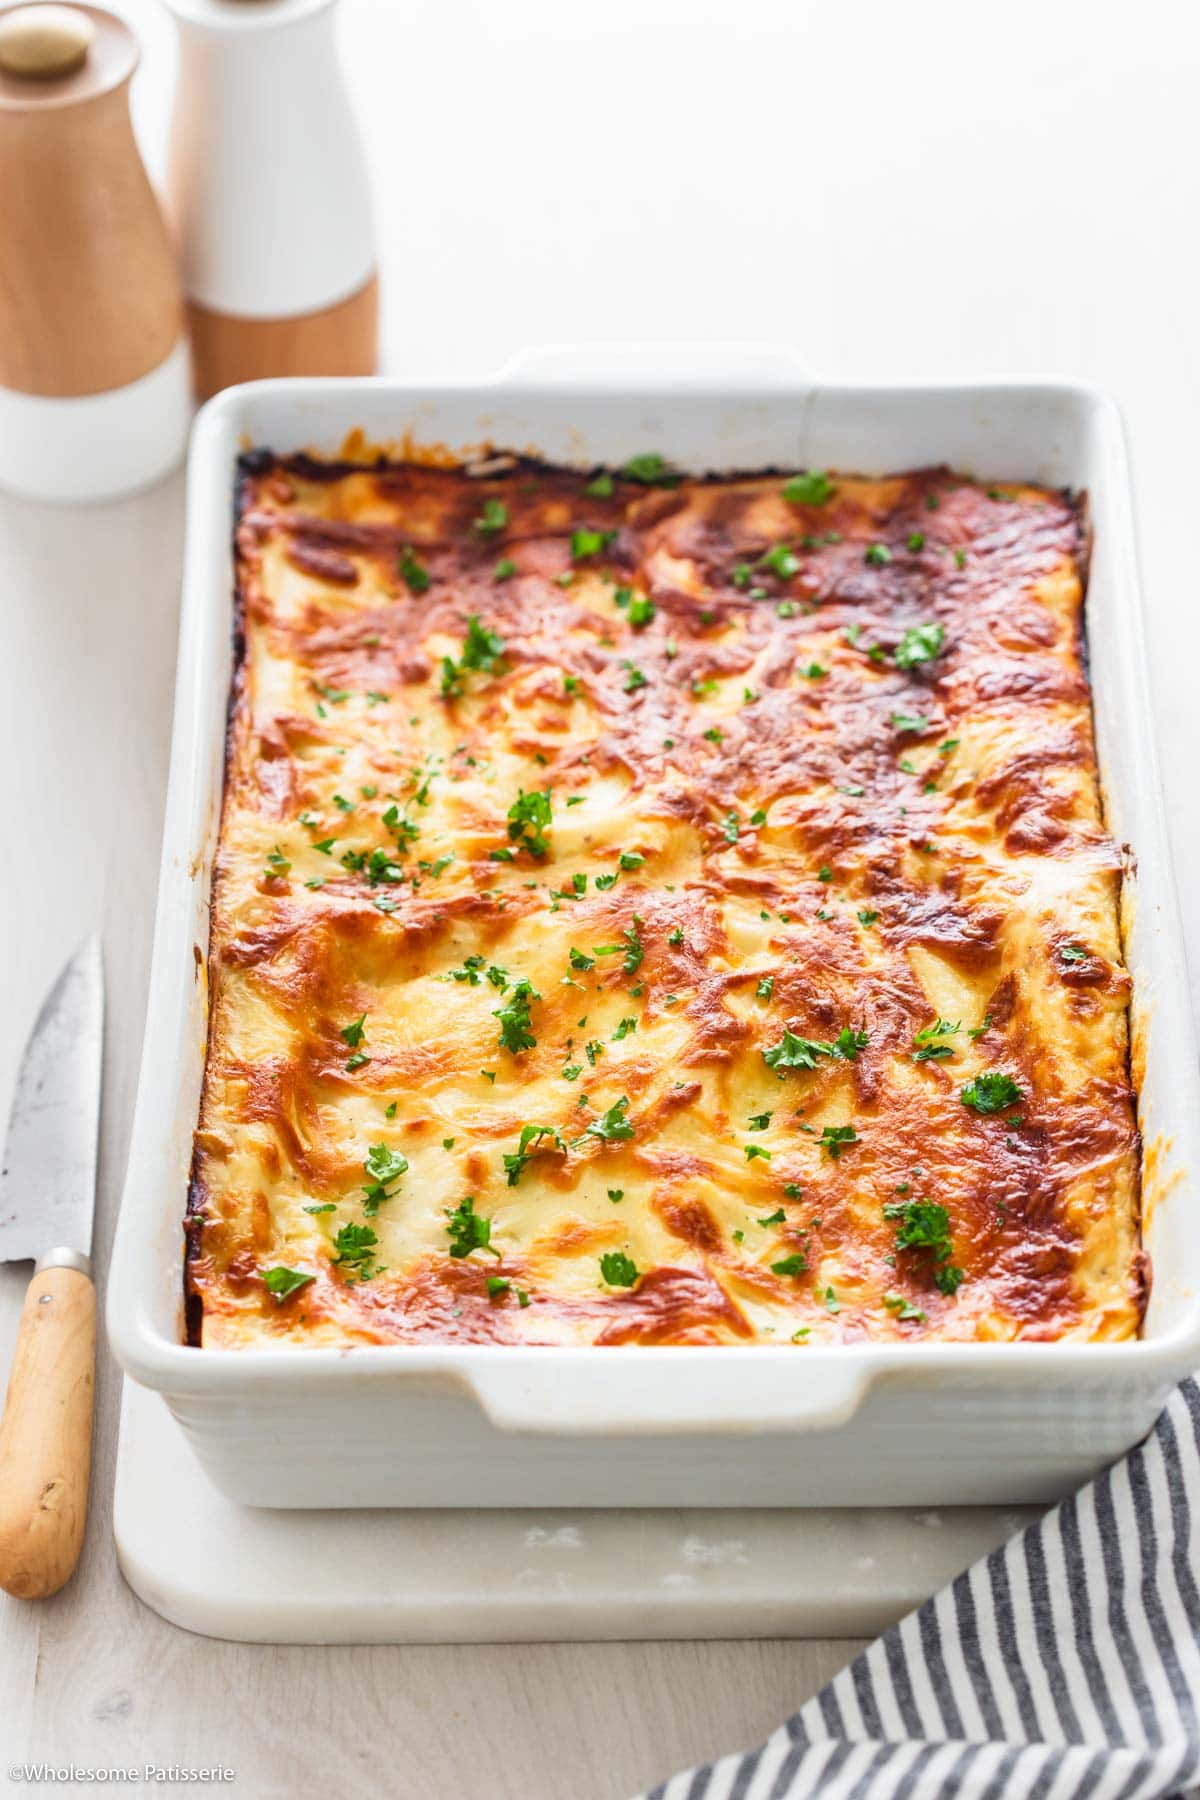 Whole vegetable tomato lasagna in baking dish displayed on white board next to wooden knife.